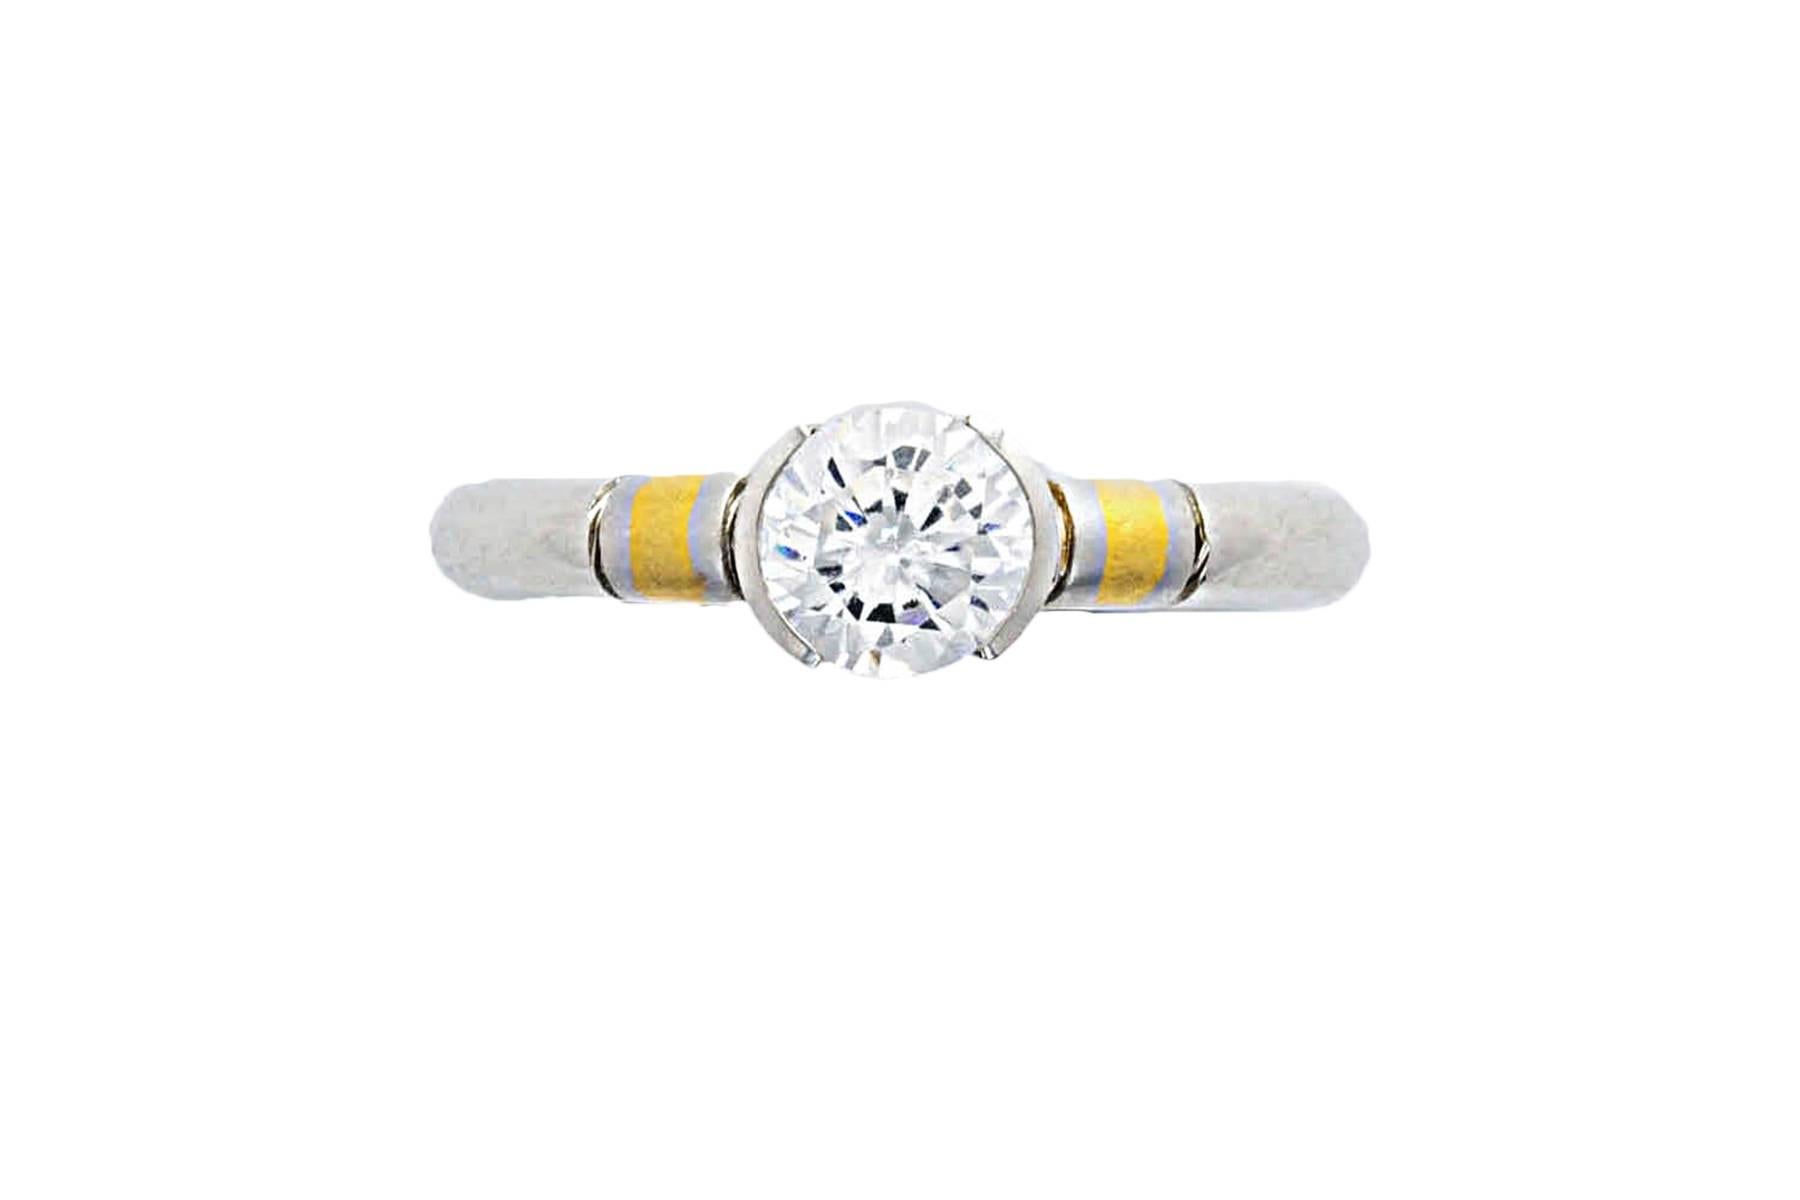 Platinum diamond ring with 18k gold inlay. The round brilliant cut diamond weighs 0.71 carat, H color, SI2 clarity and is set in partial bezel. On each side of the diamond there is a satin finish yellow gold inlay accent.  Simple, unique and